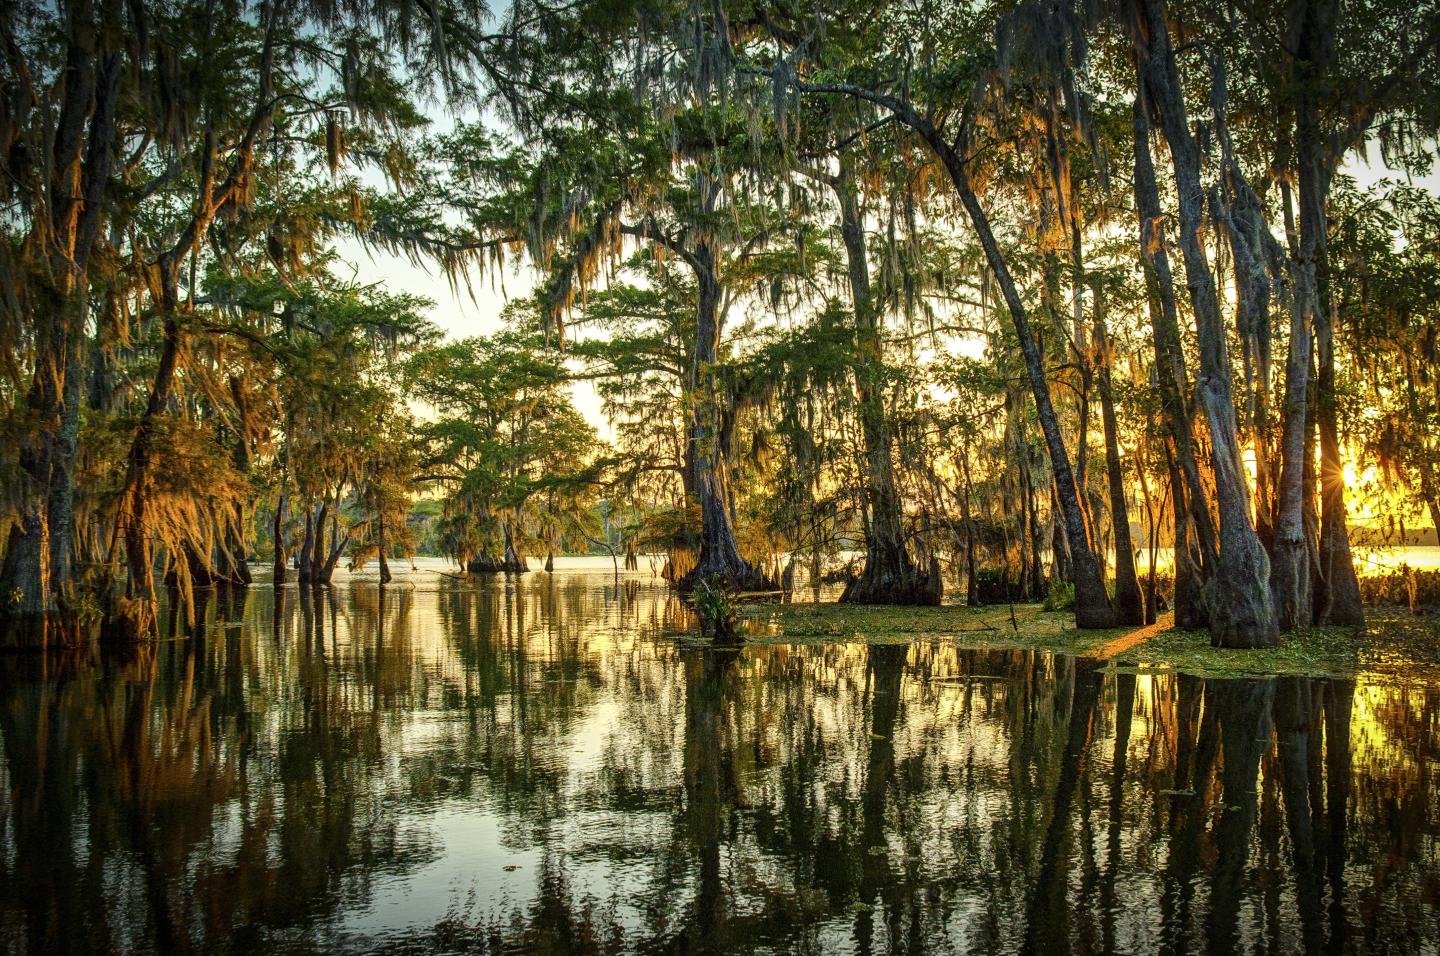 A Louisiana swamp with trees coming seemingly straight out of the water